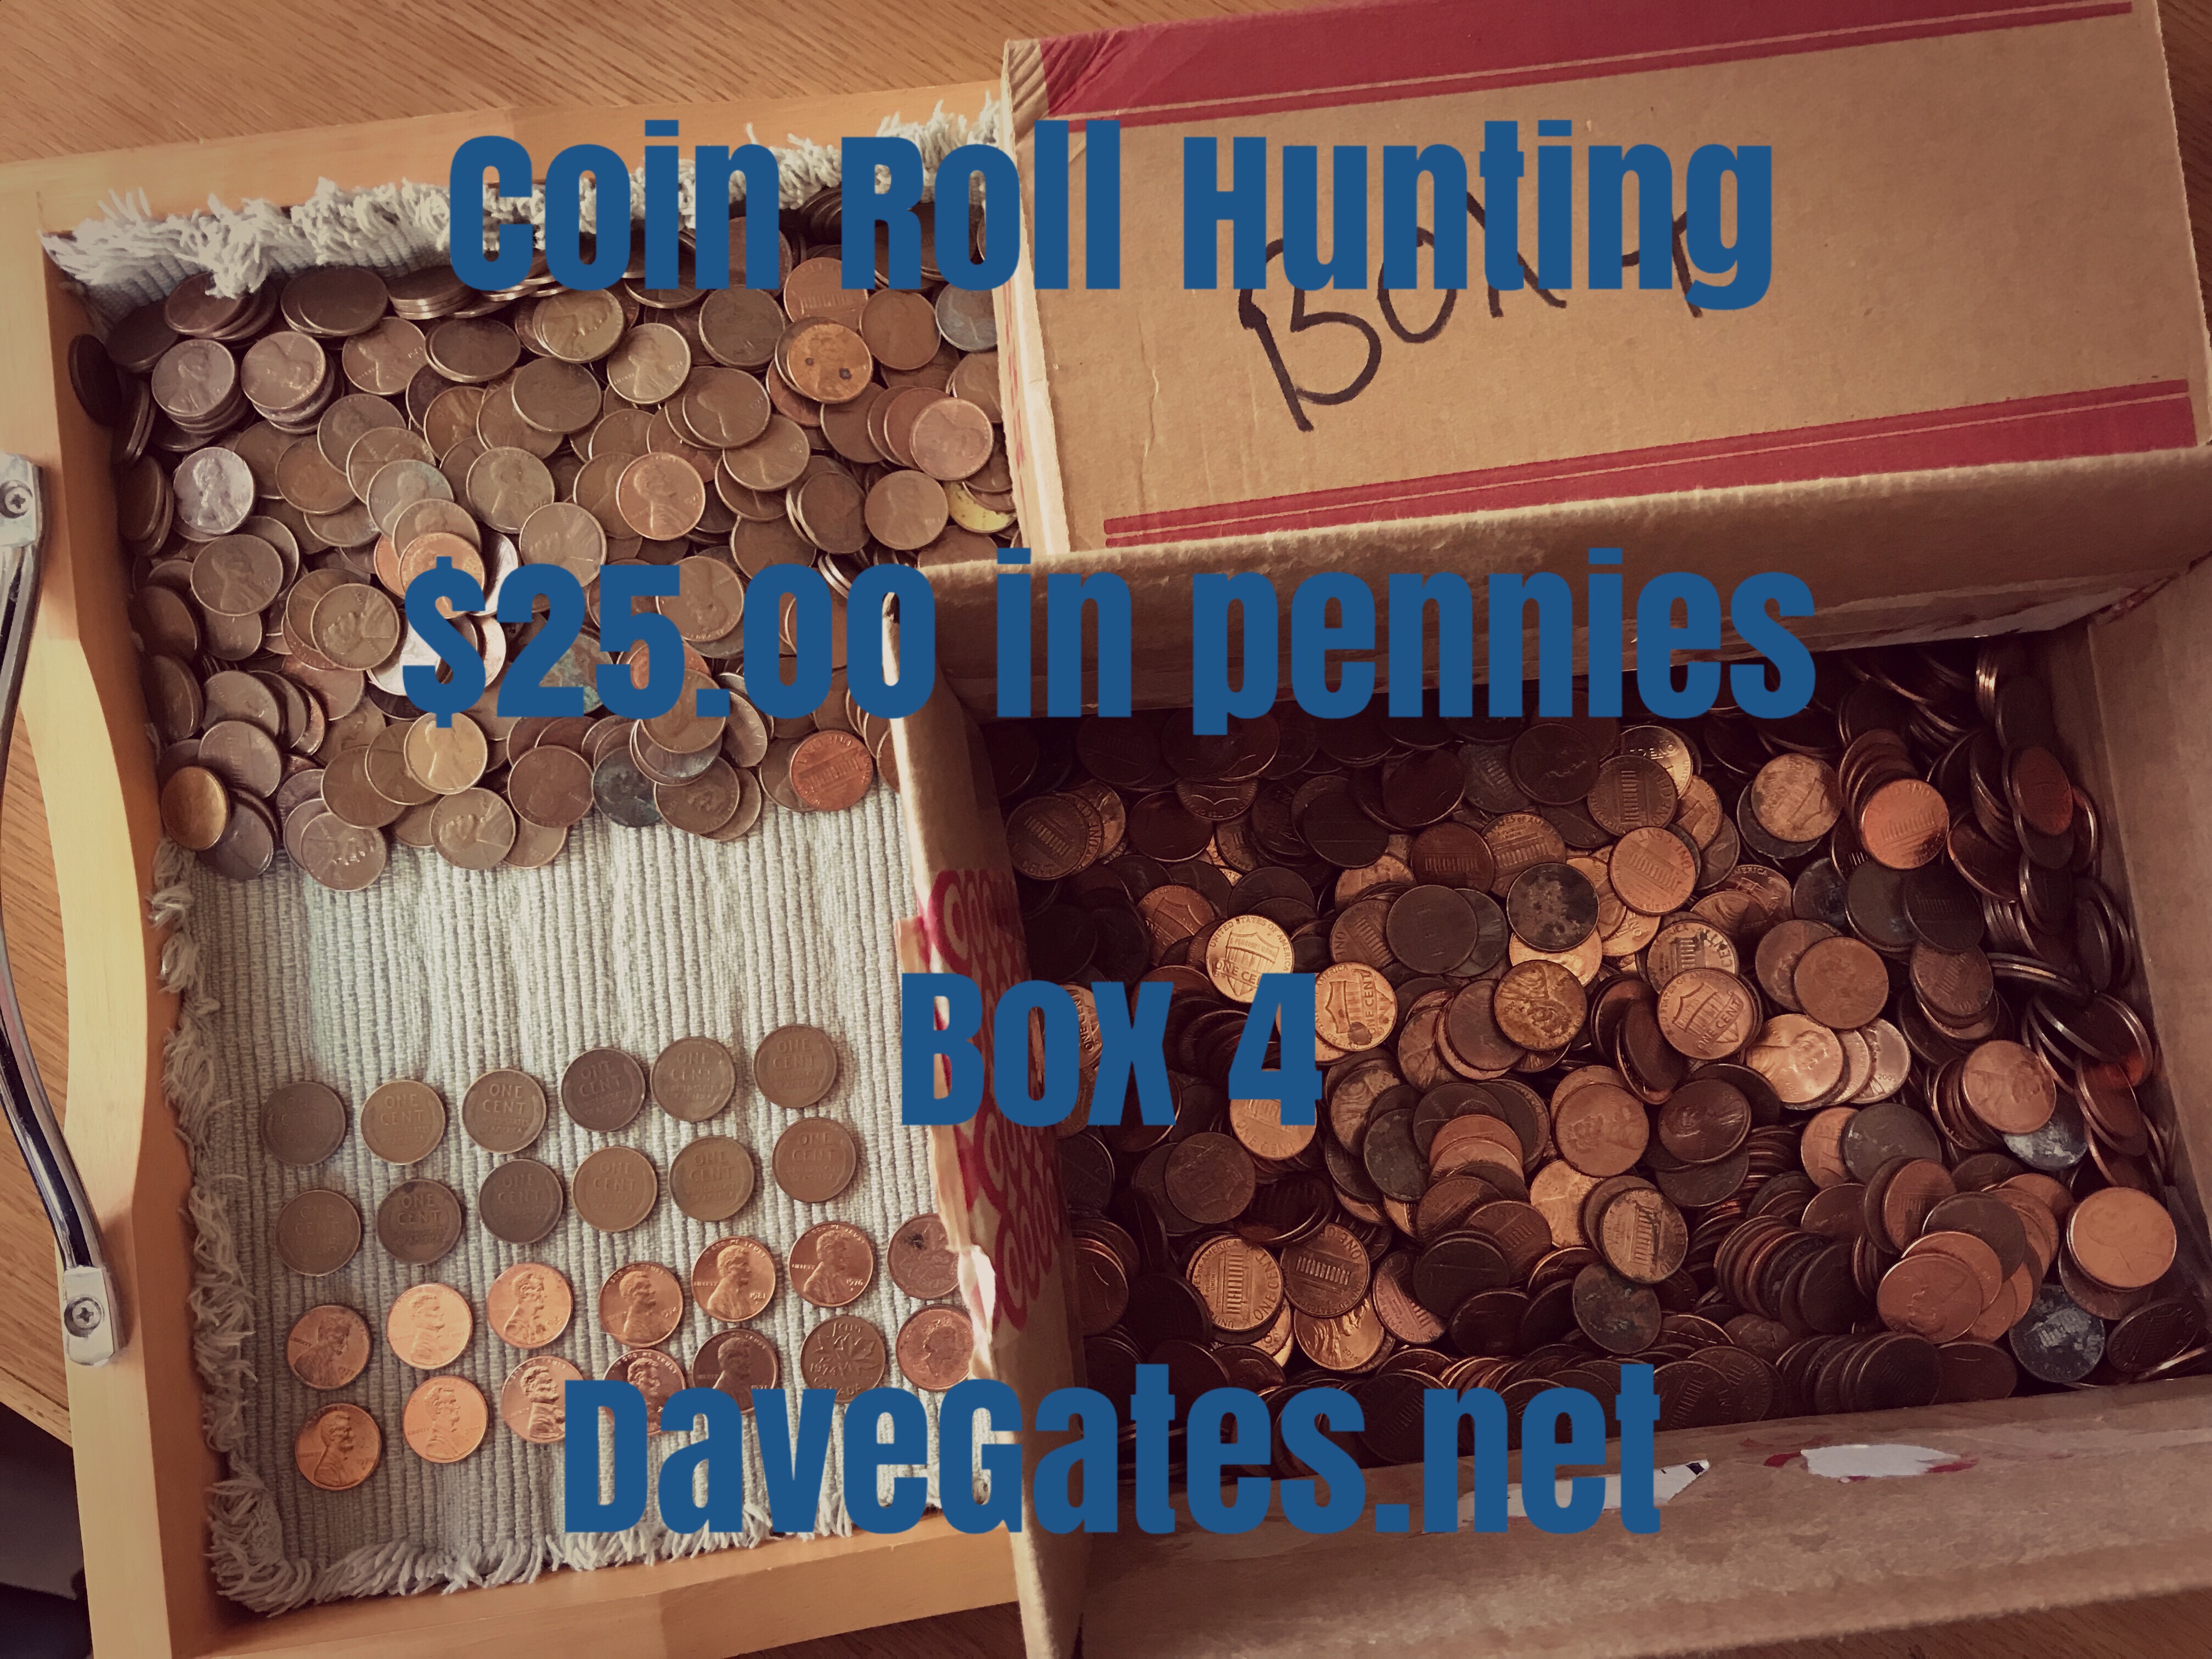 Coin Roll Hunting $25 in Pennies - Box 4